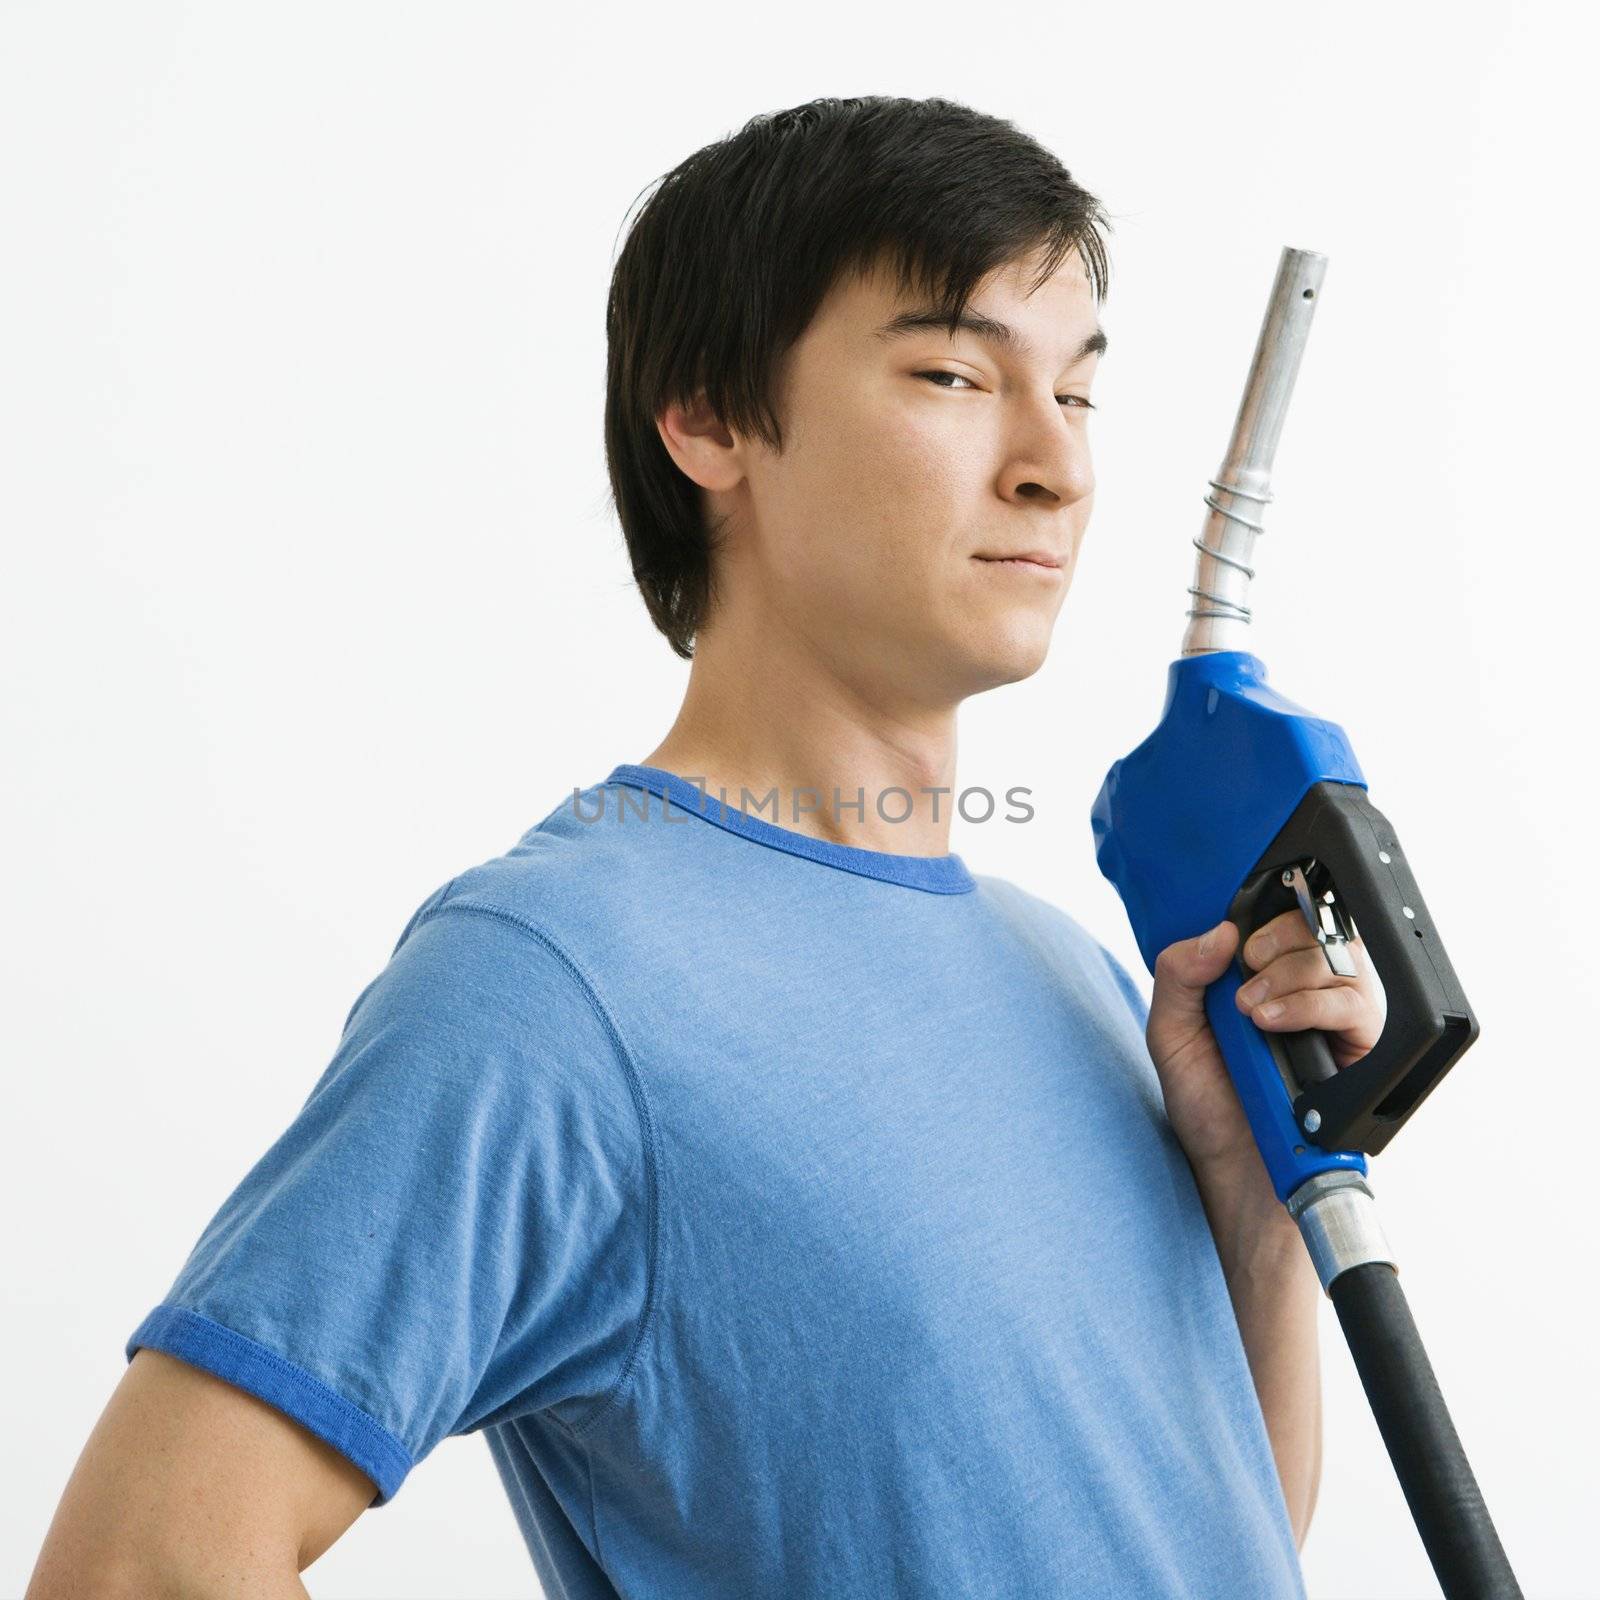 Asian young man holding gasoline pump nozzle.